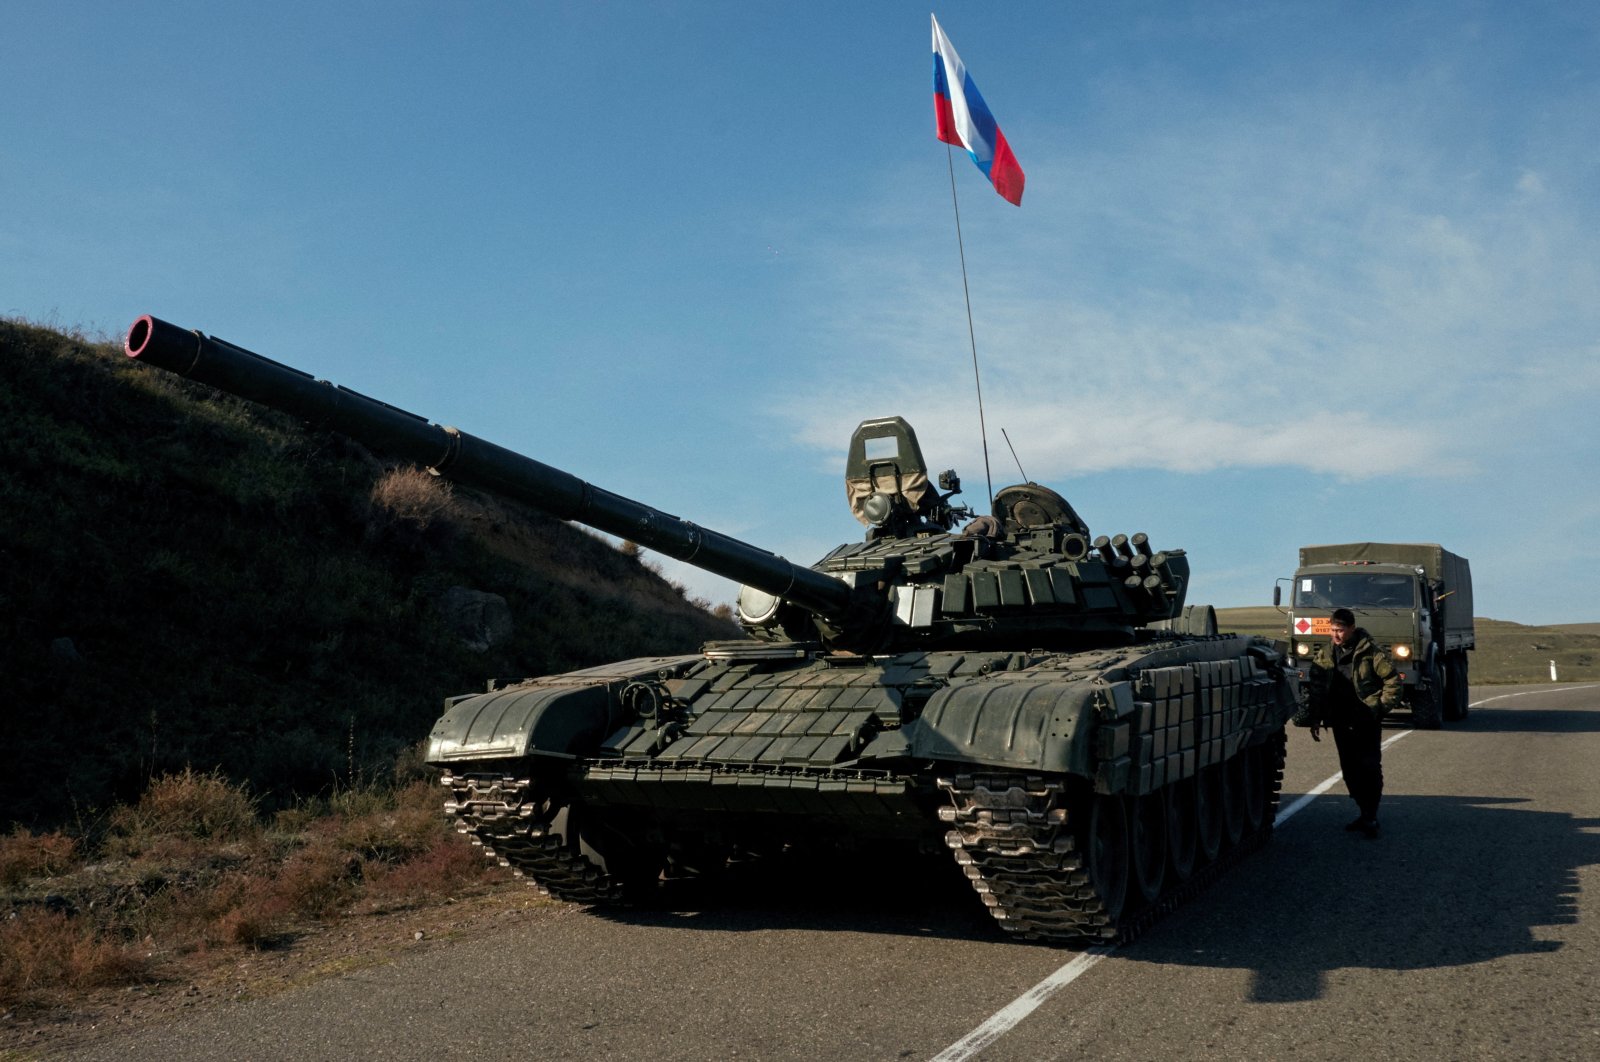 A service member of the Russian peacekeeping troops stands next to a tank near the border with Armenia, following the signing of a deal to end the military conflict between Azerbaijan and ethnic Armenian forces, in the region of Karabakh, Nov. 10, 2020. (Reuters Photo)